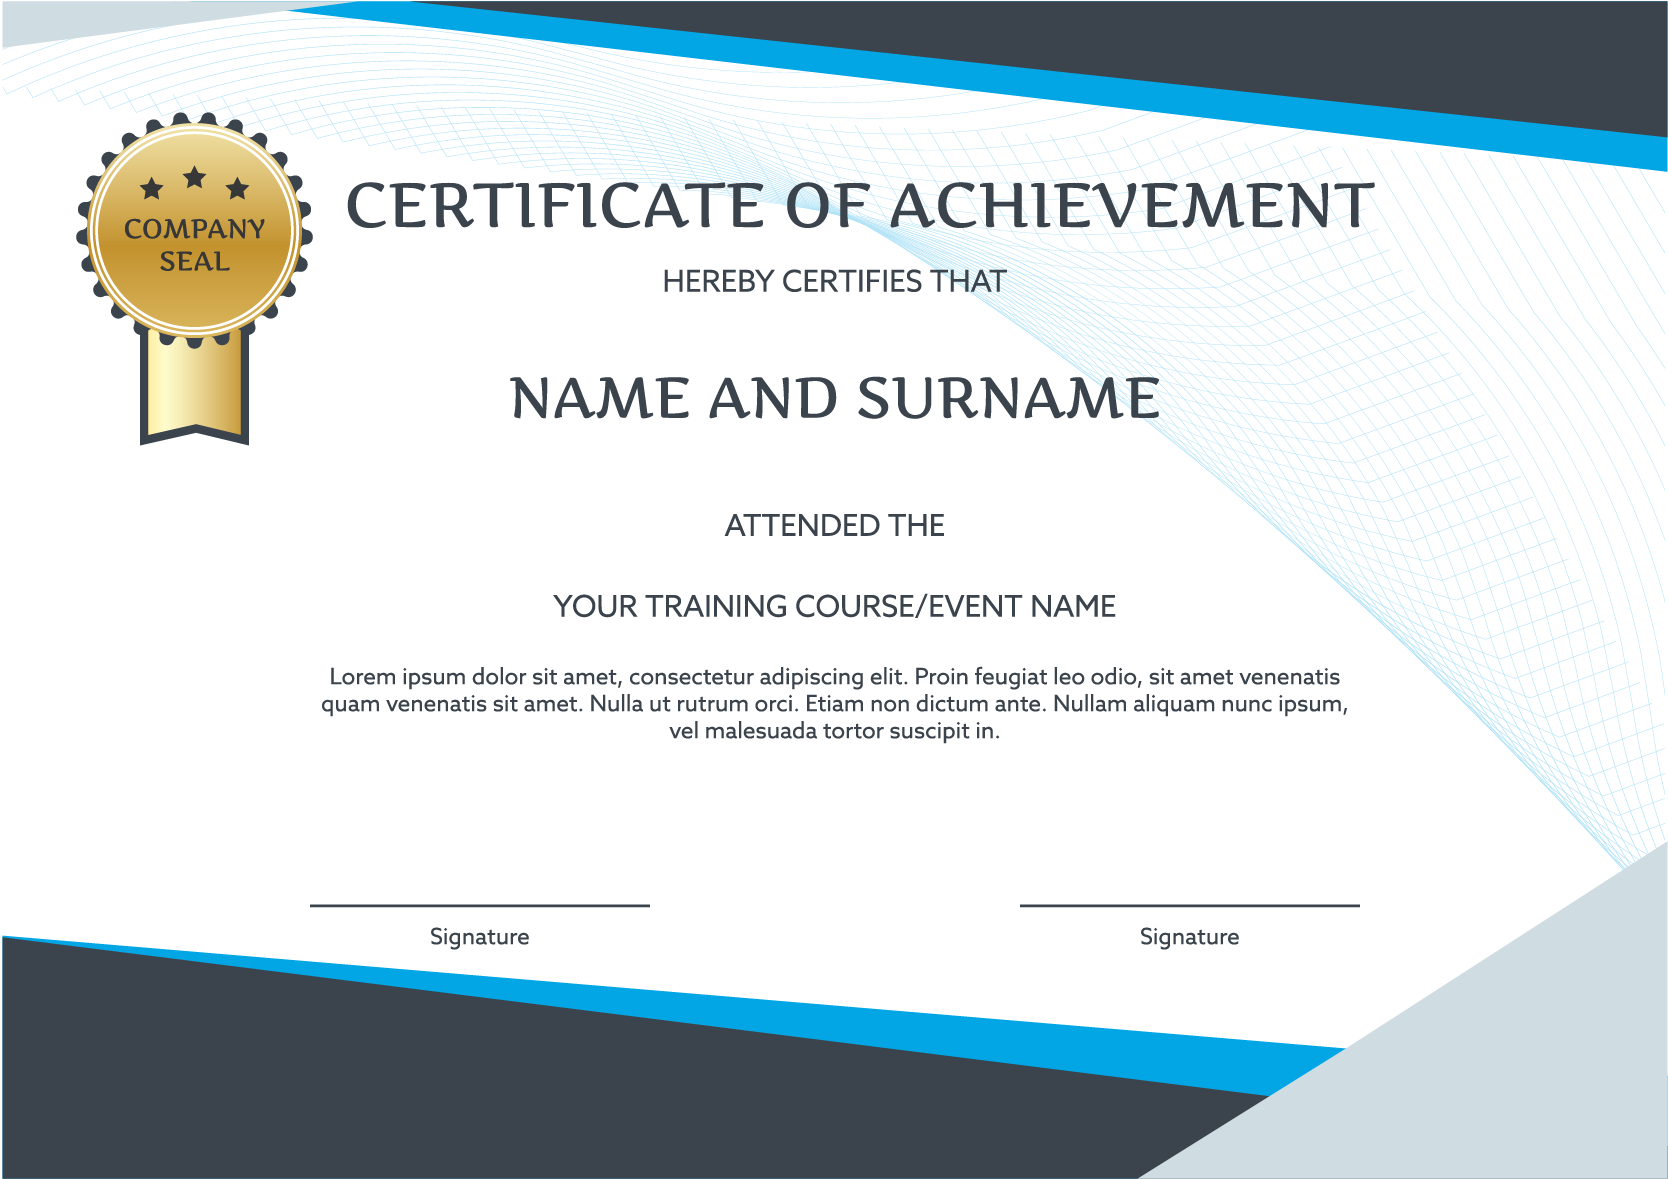 Training Course Certificate Background PNG Image